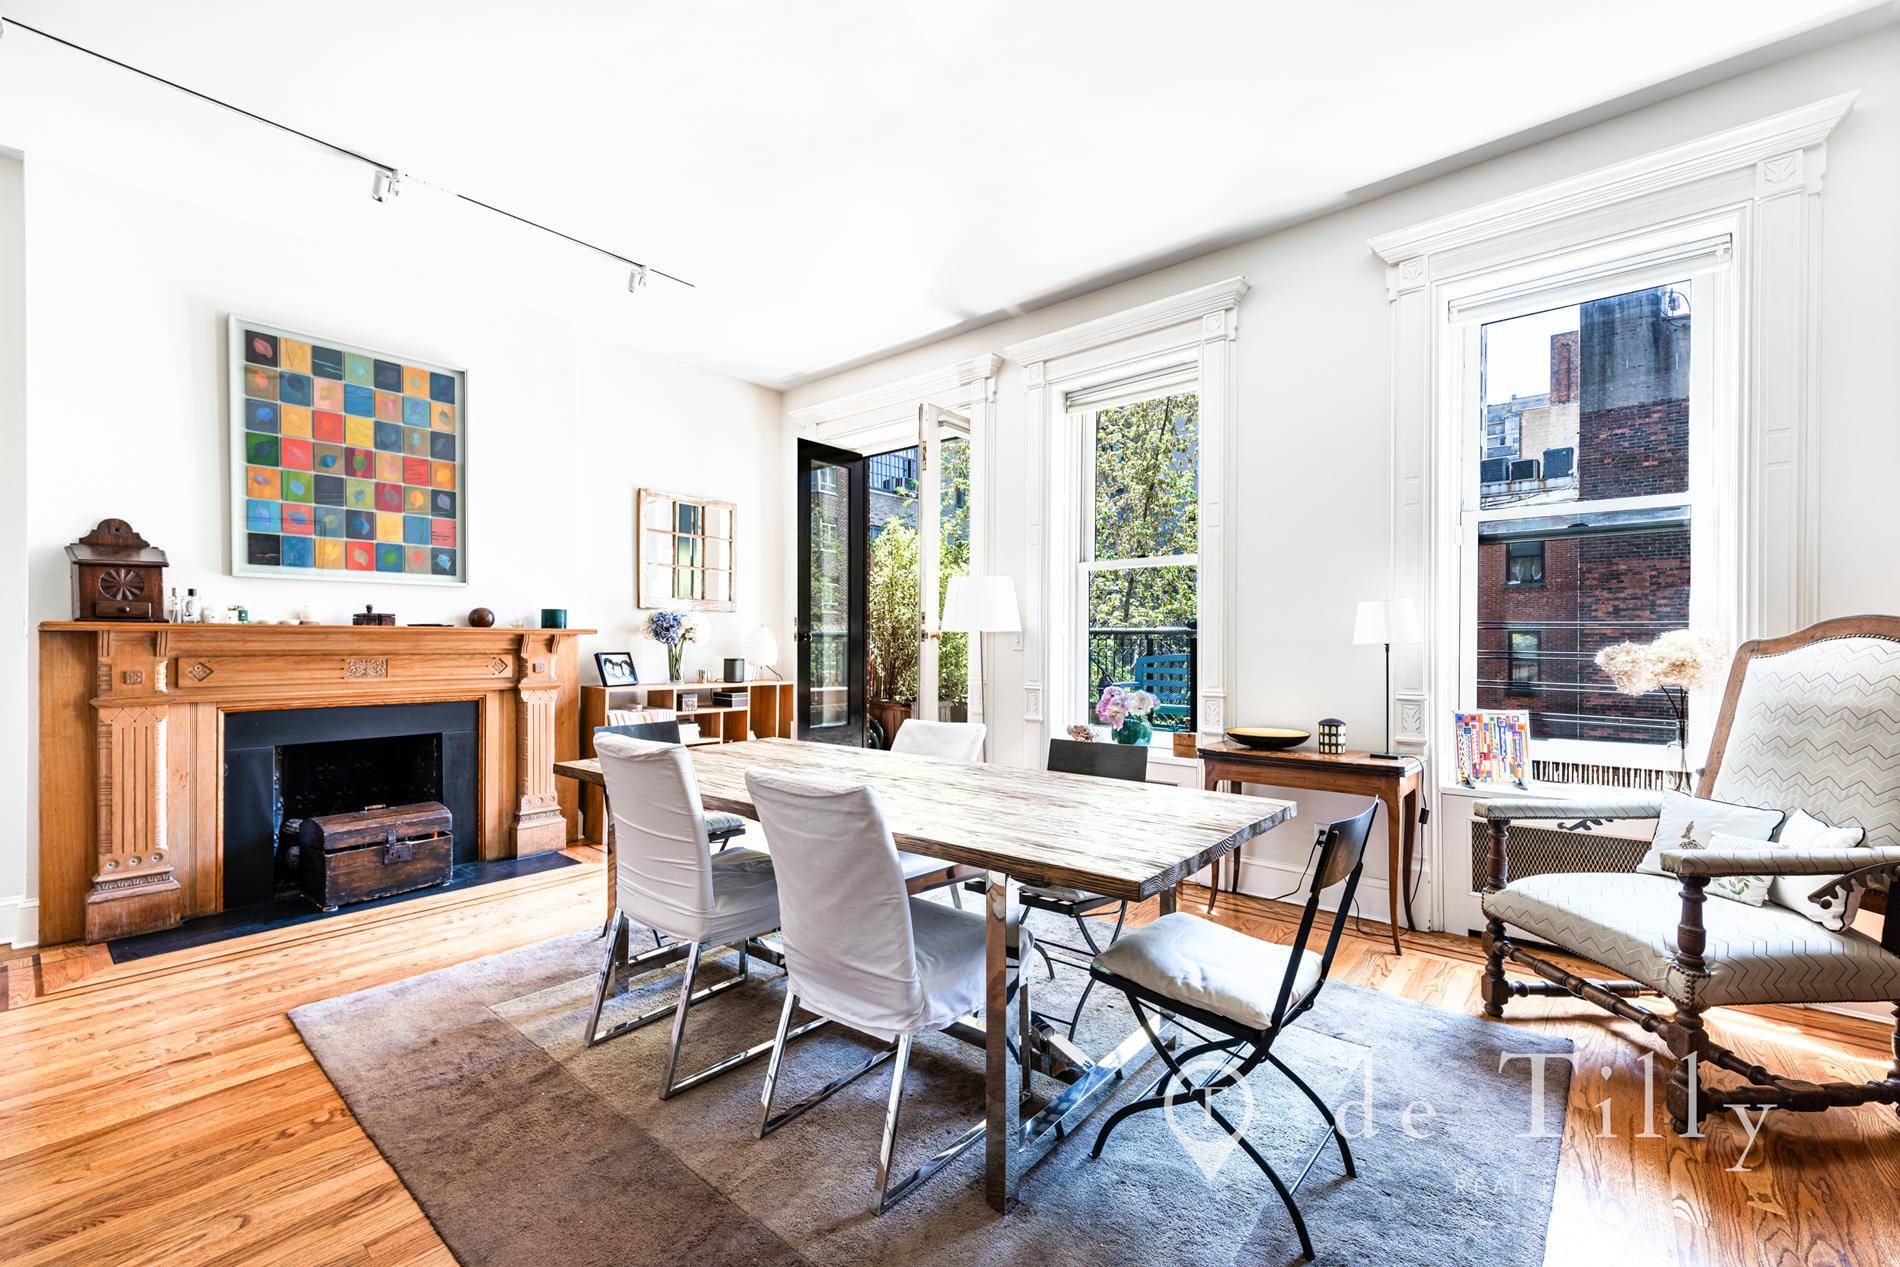 4 BEDROOMS UPPER TRIPLEX CENTRAL PARK PRIVATE ROOFTOPDiscover this beautifully updated upper triplex on the Upper West Side, just a stone's throw away from Central Park.